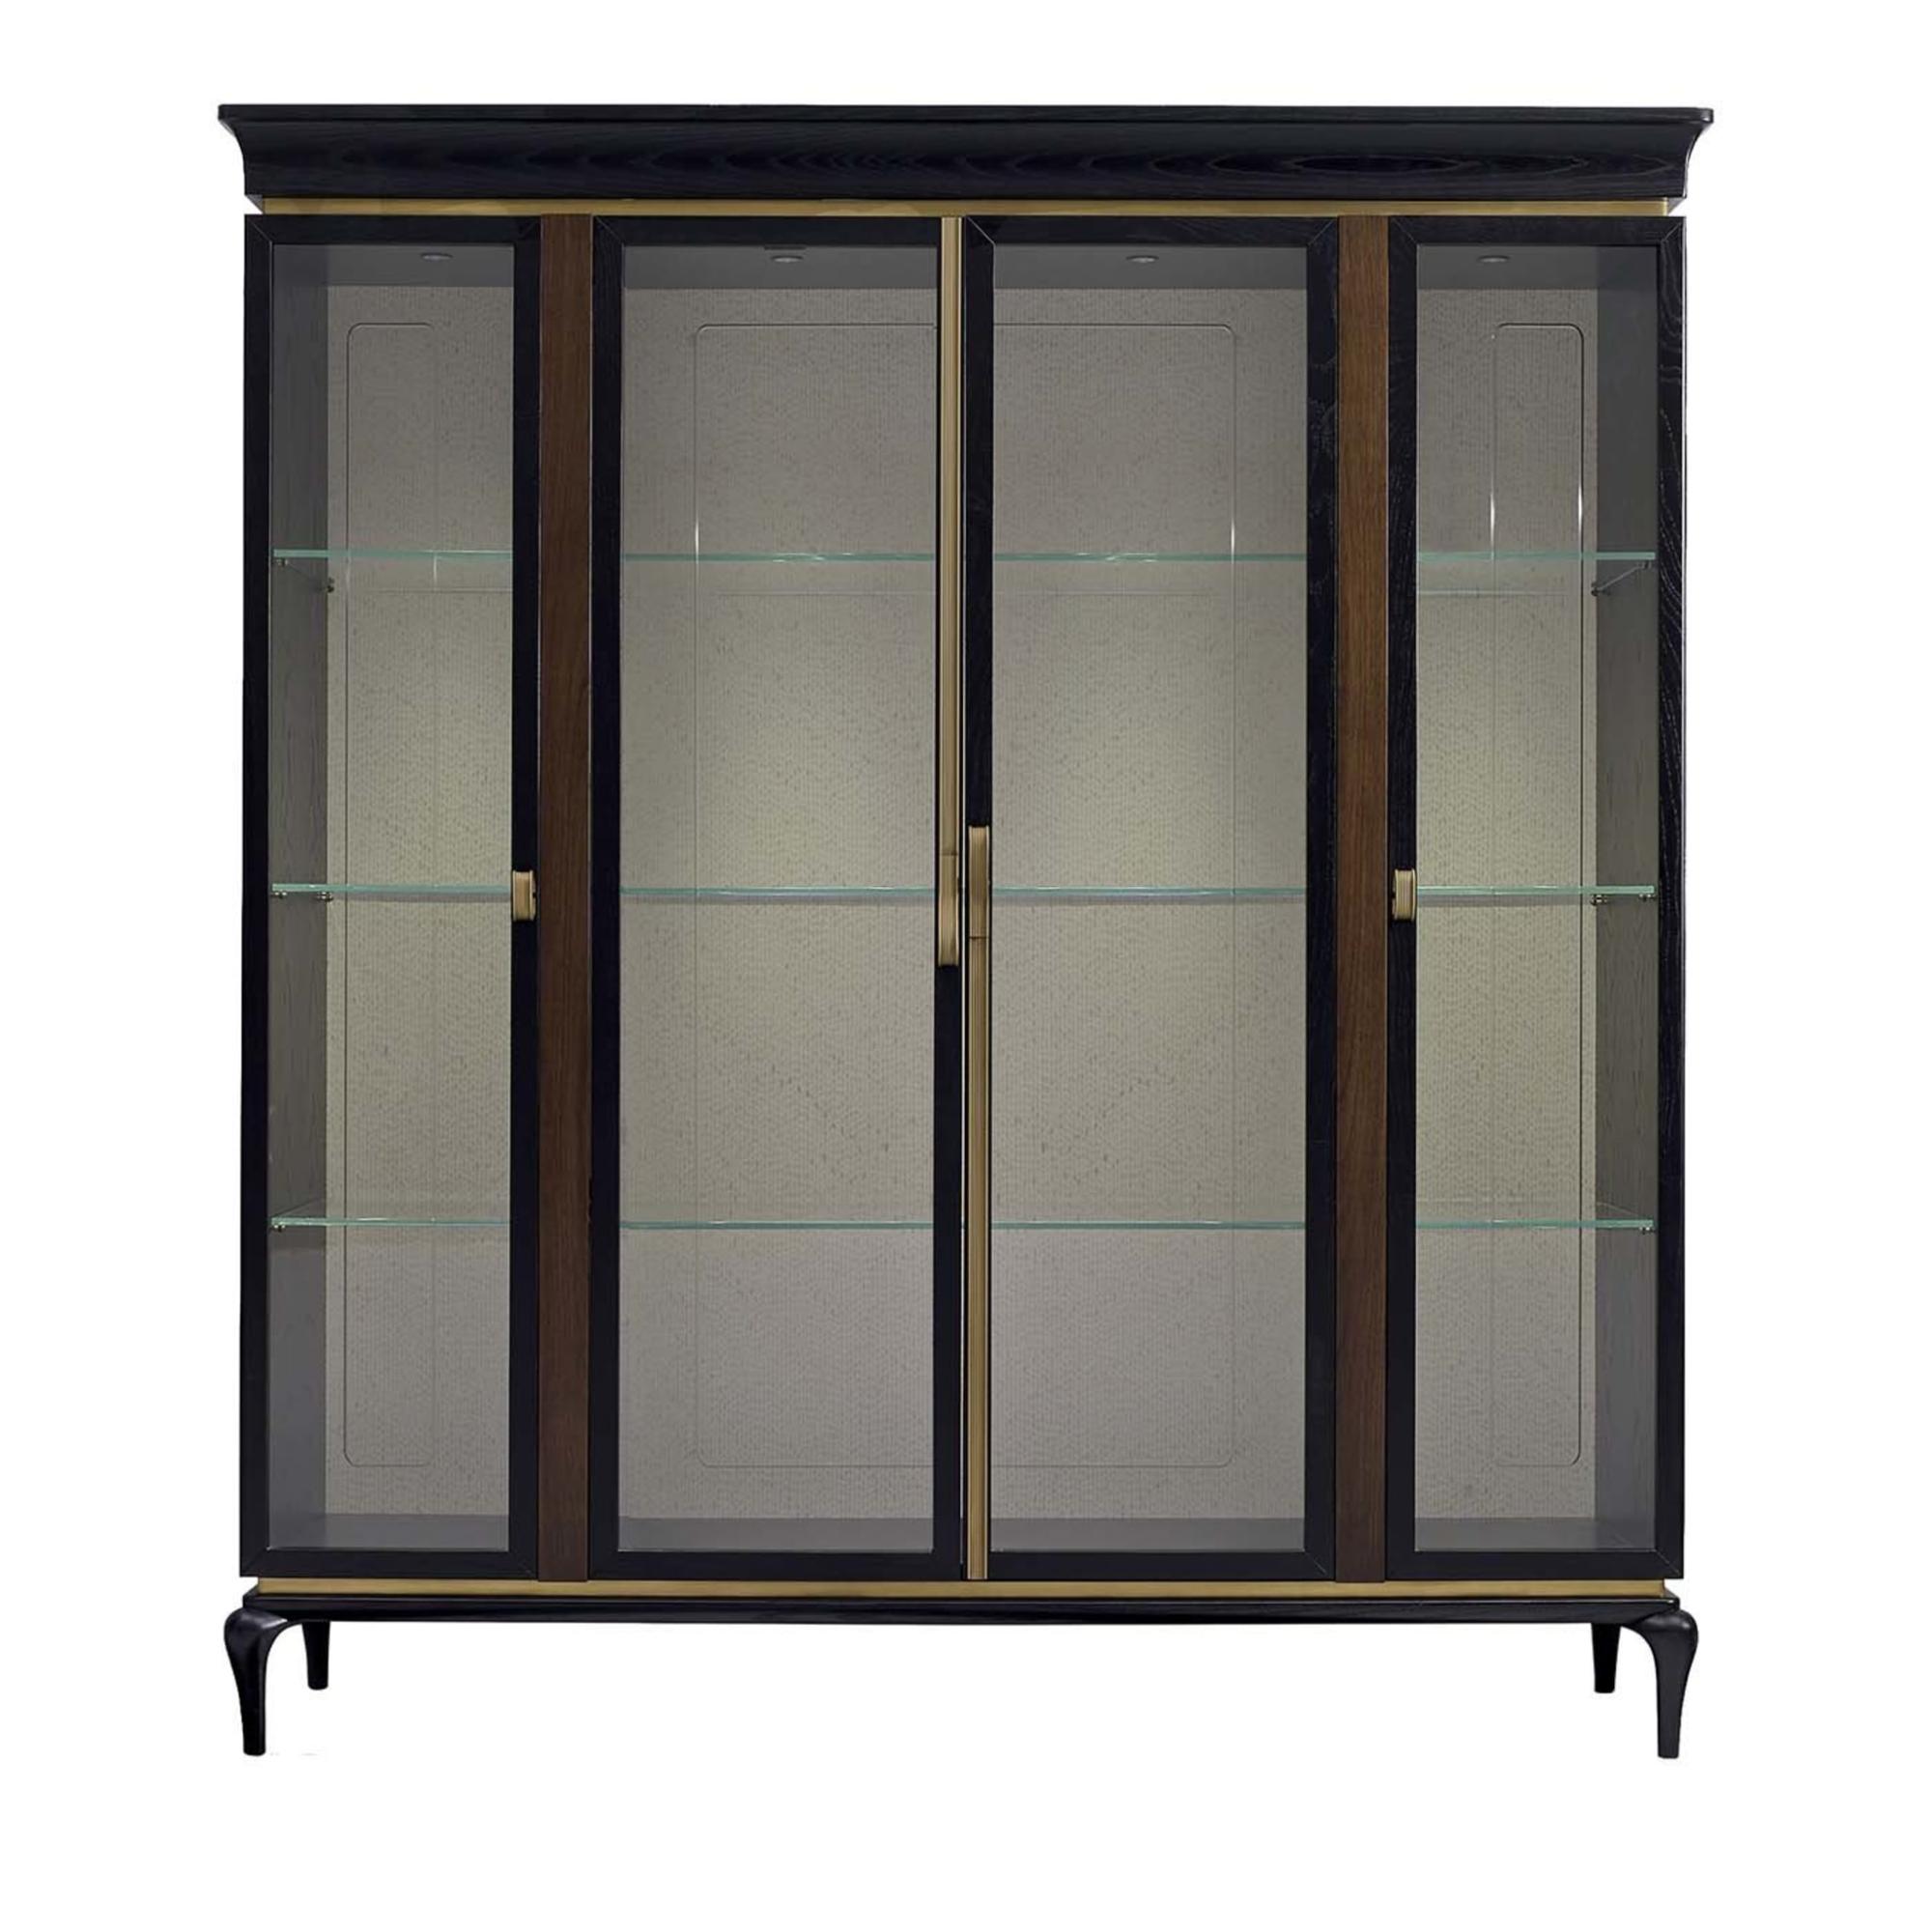 Dilan Crafted Luxury Cabinet